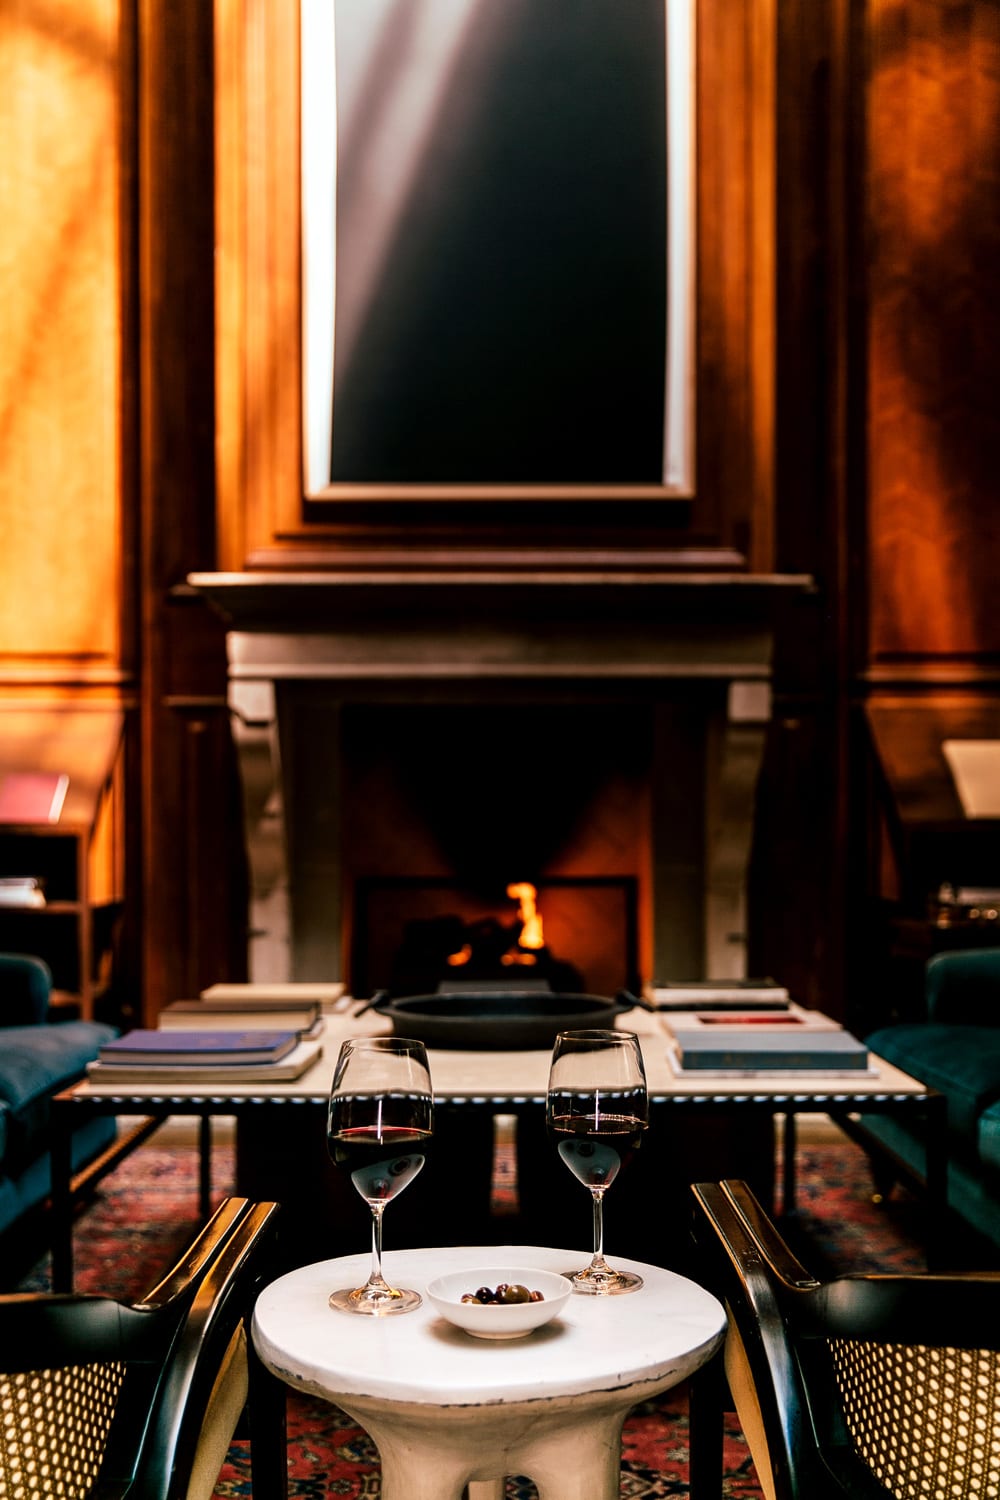 fireplace and table with wine glasses